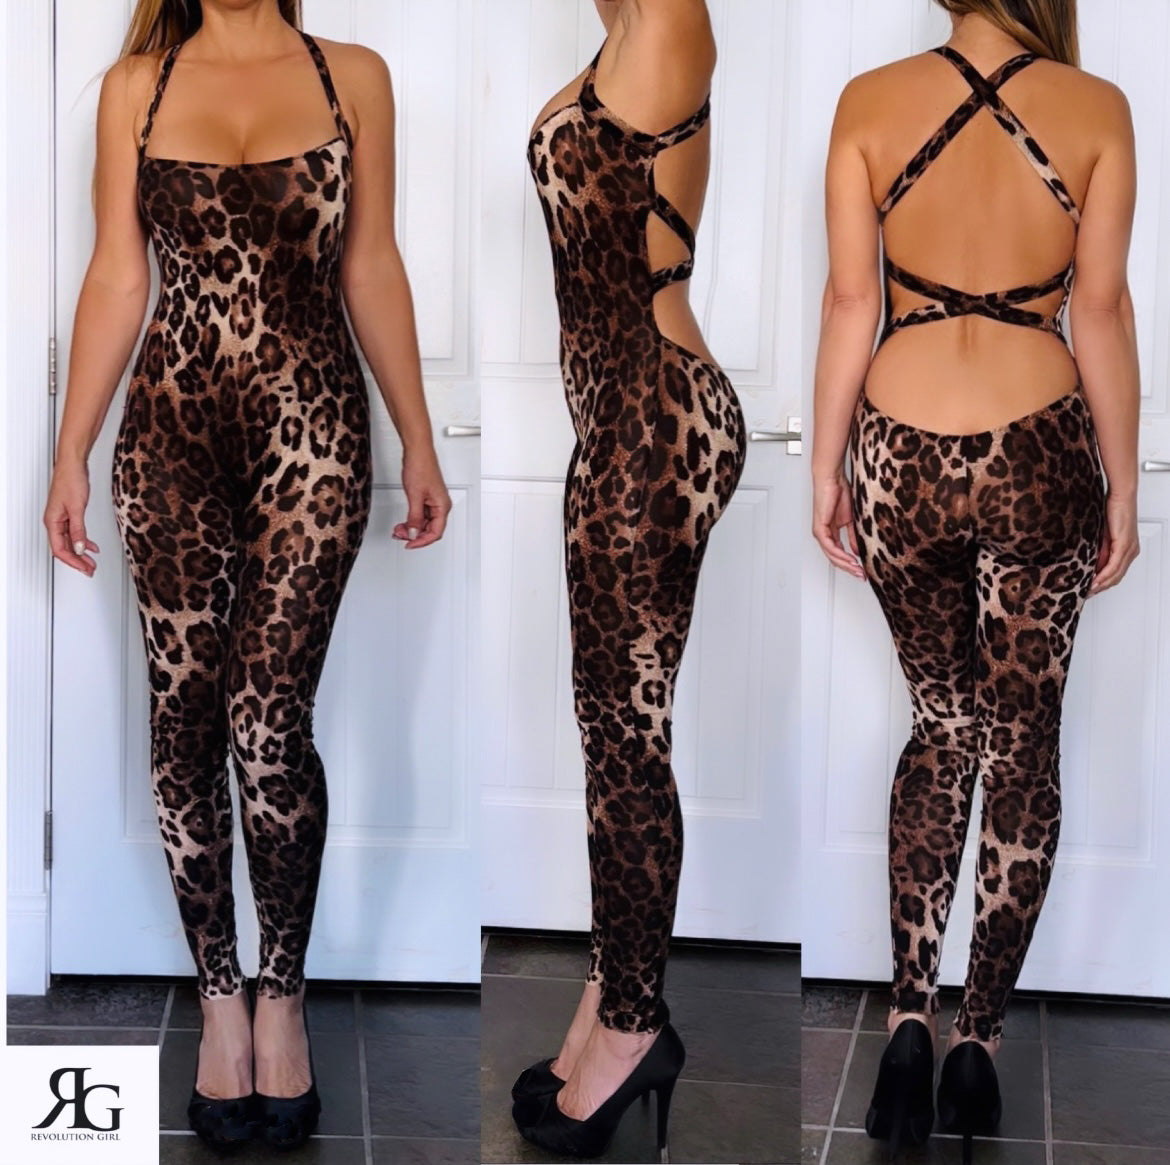 Sexy Leopard Print One Piece Crisscross Back Jumpsuit Catsuit by Revolution Girl ⭐️